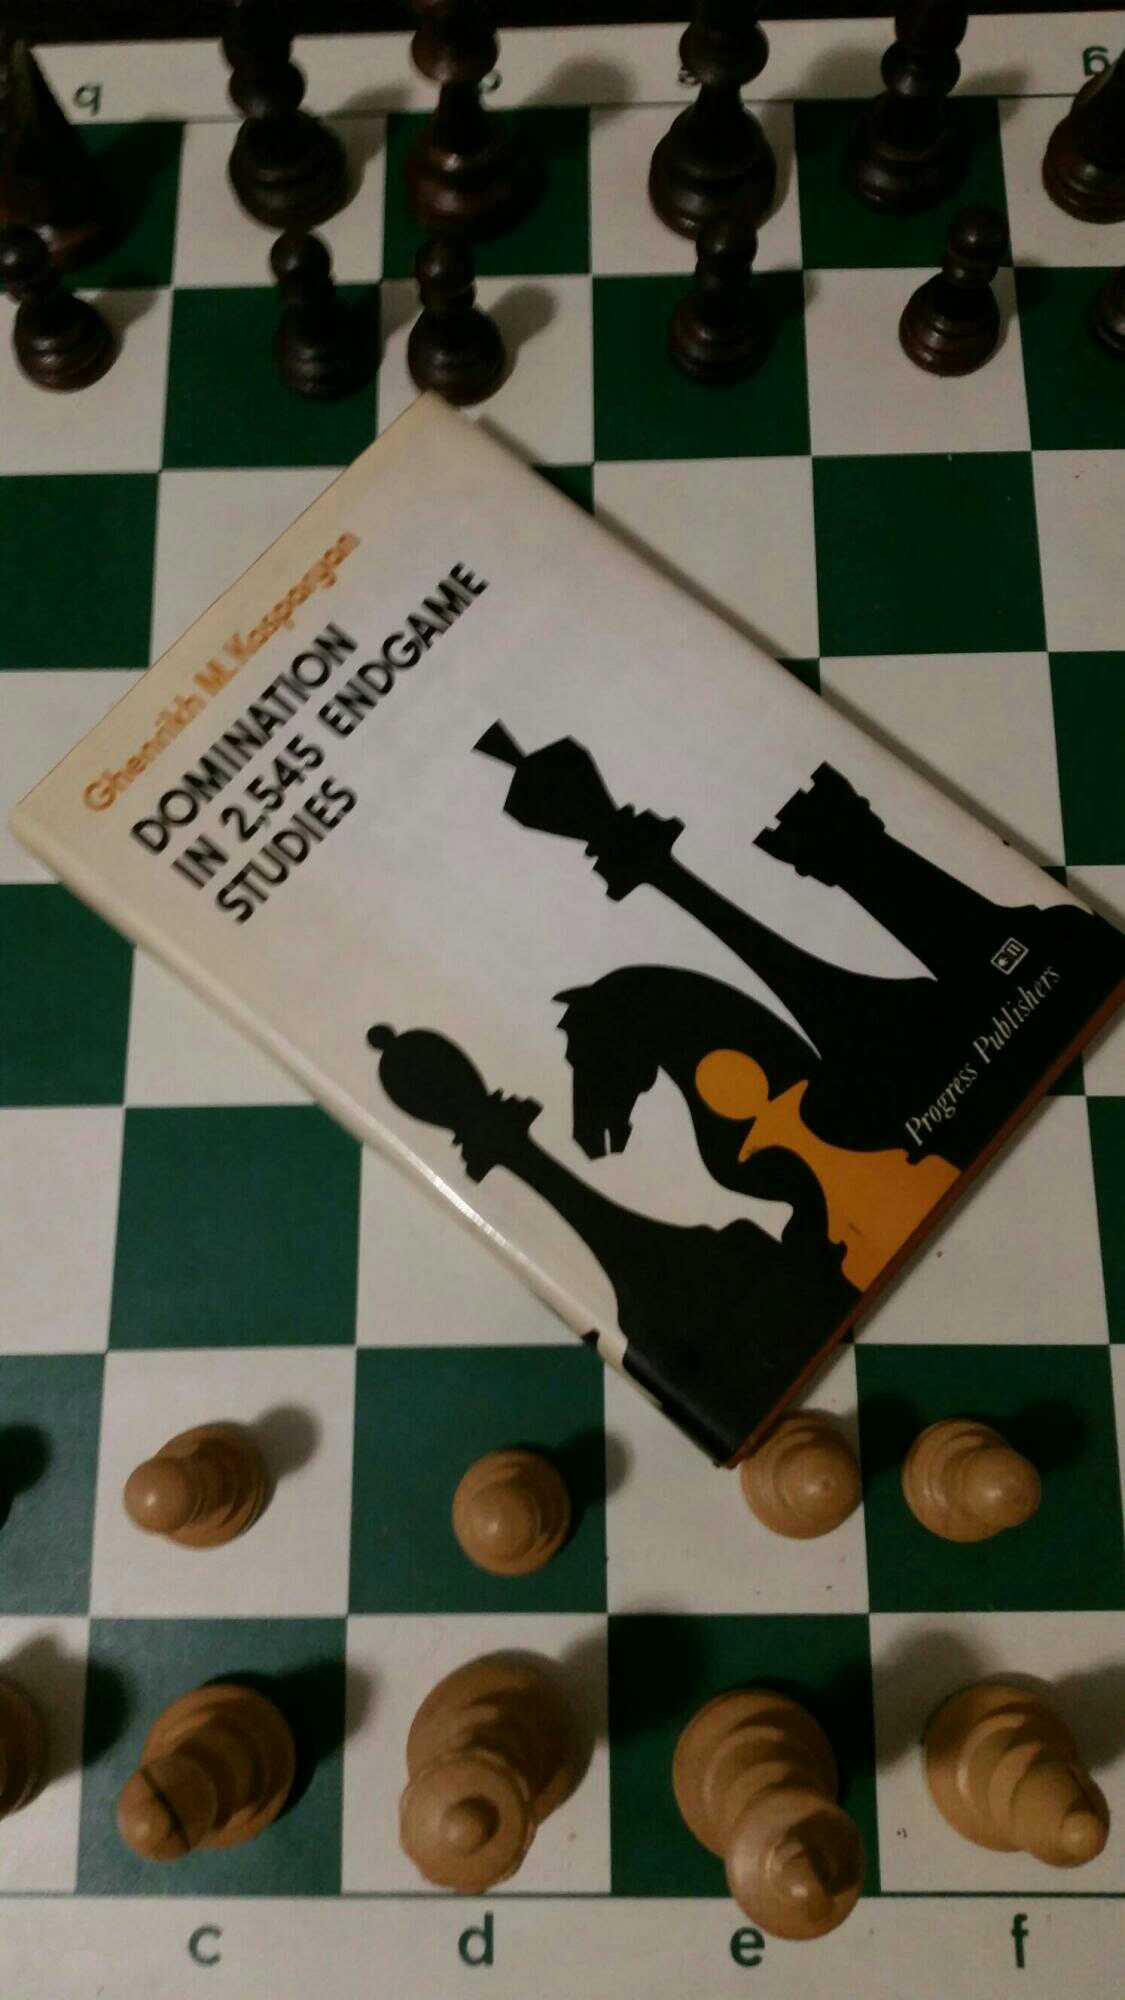 The 20 best Chess Books as recommended by Grandmasters - Listudy